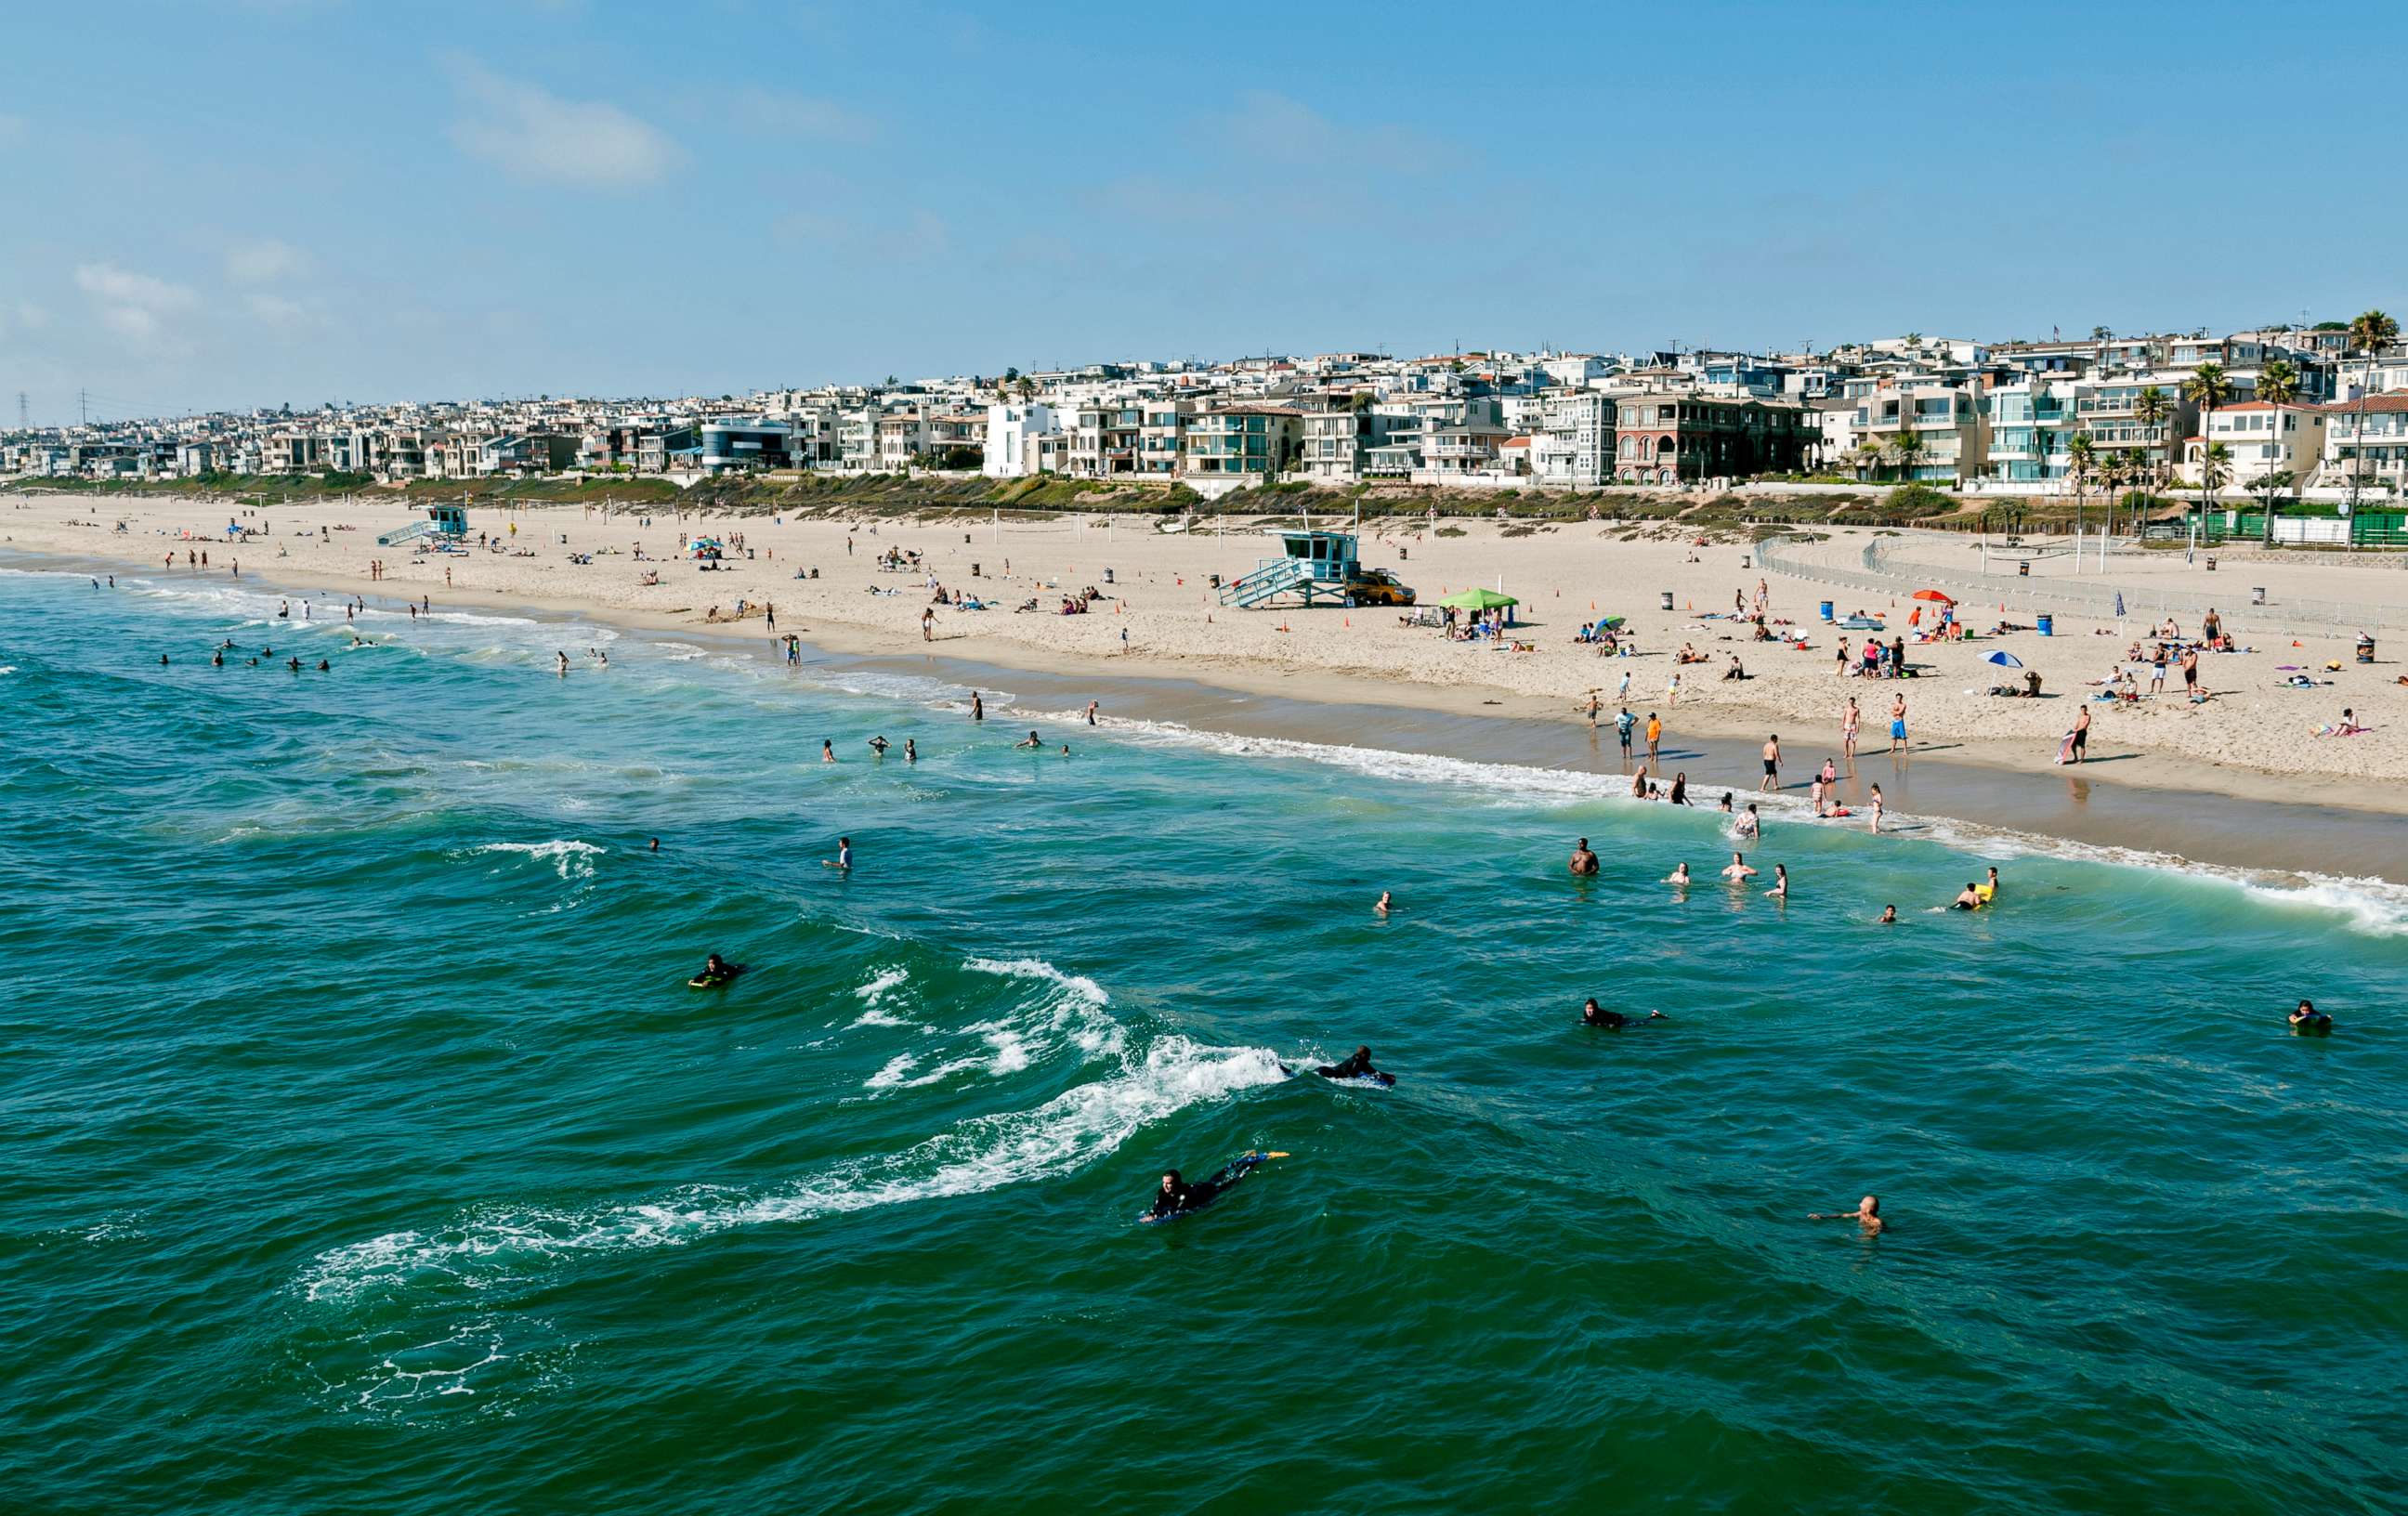 PHOTO: This stock photo depicts swimmers and surfers enjoying the water in Manhattan Beach, California.